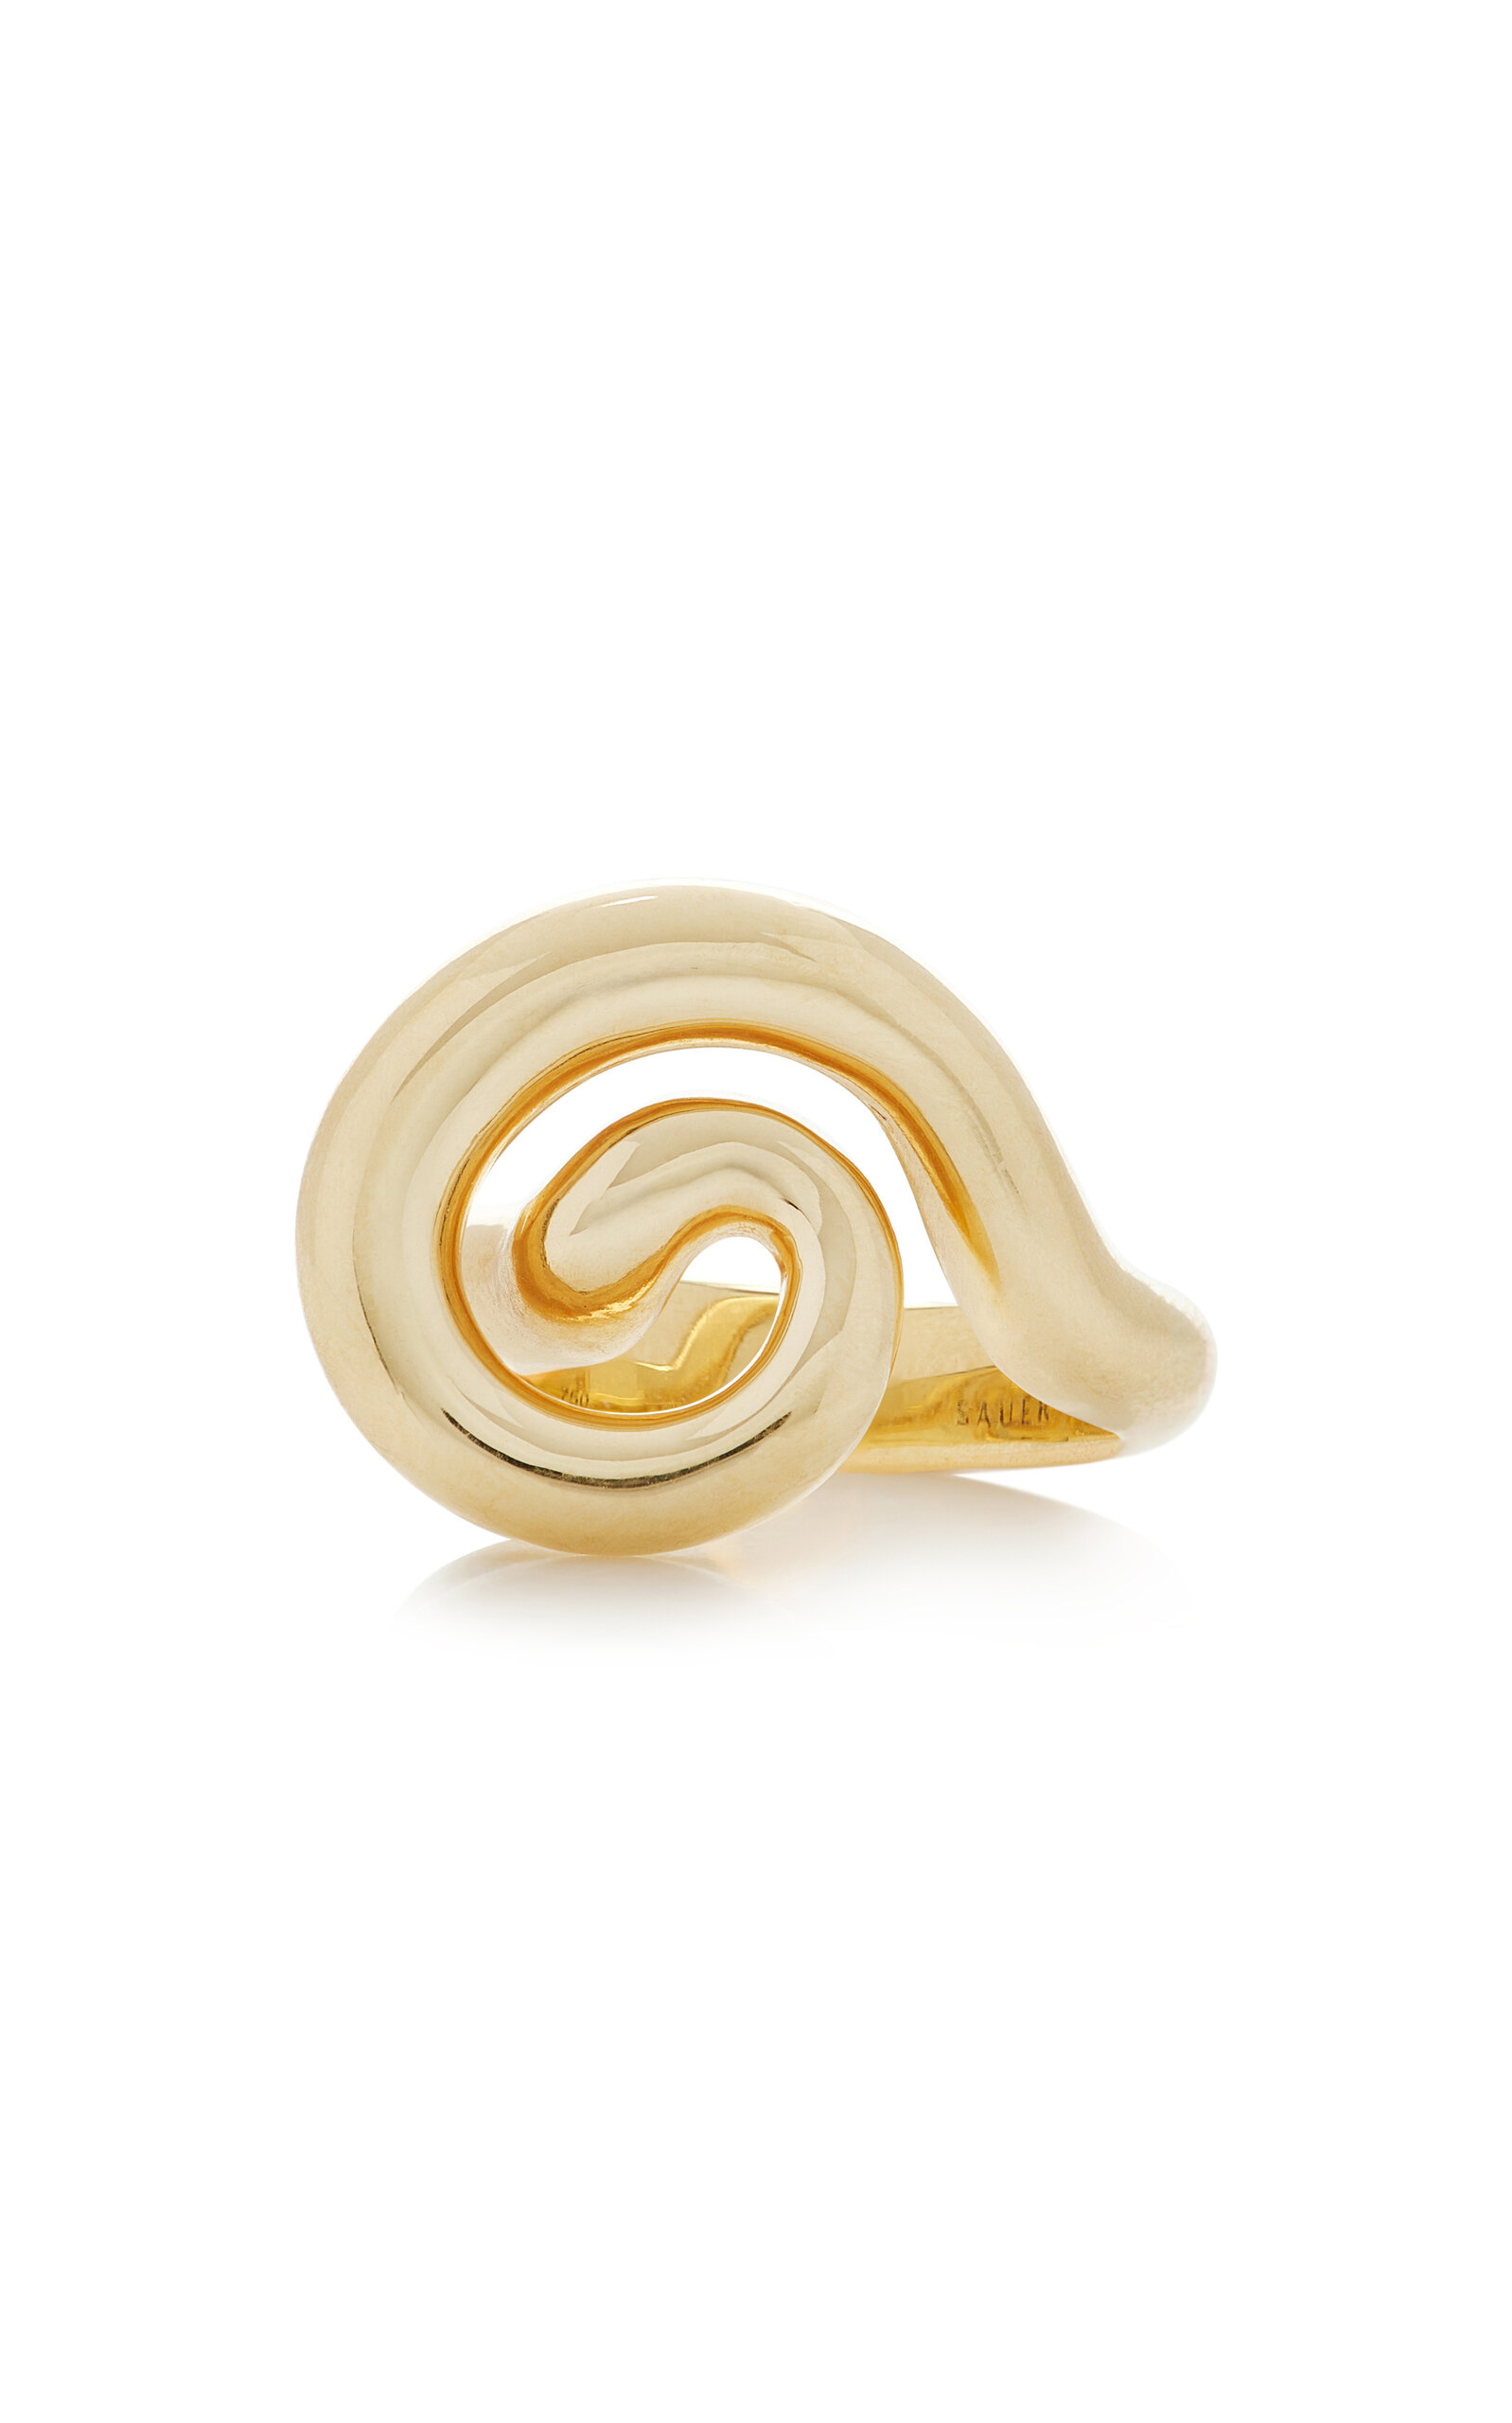 Sauer S 18k Yellow Gold Ring